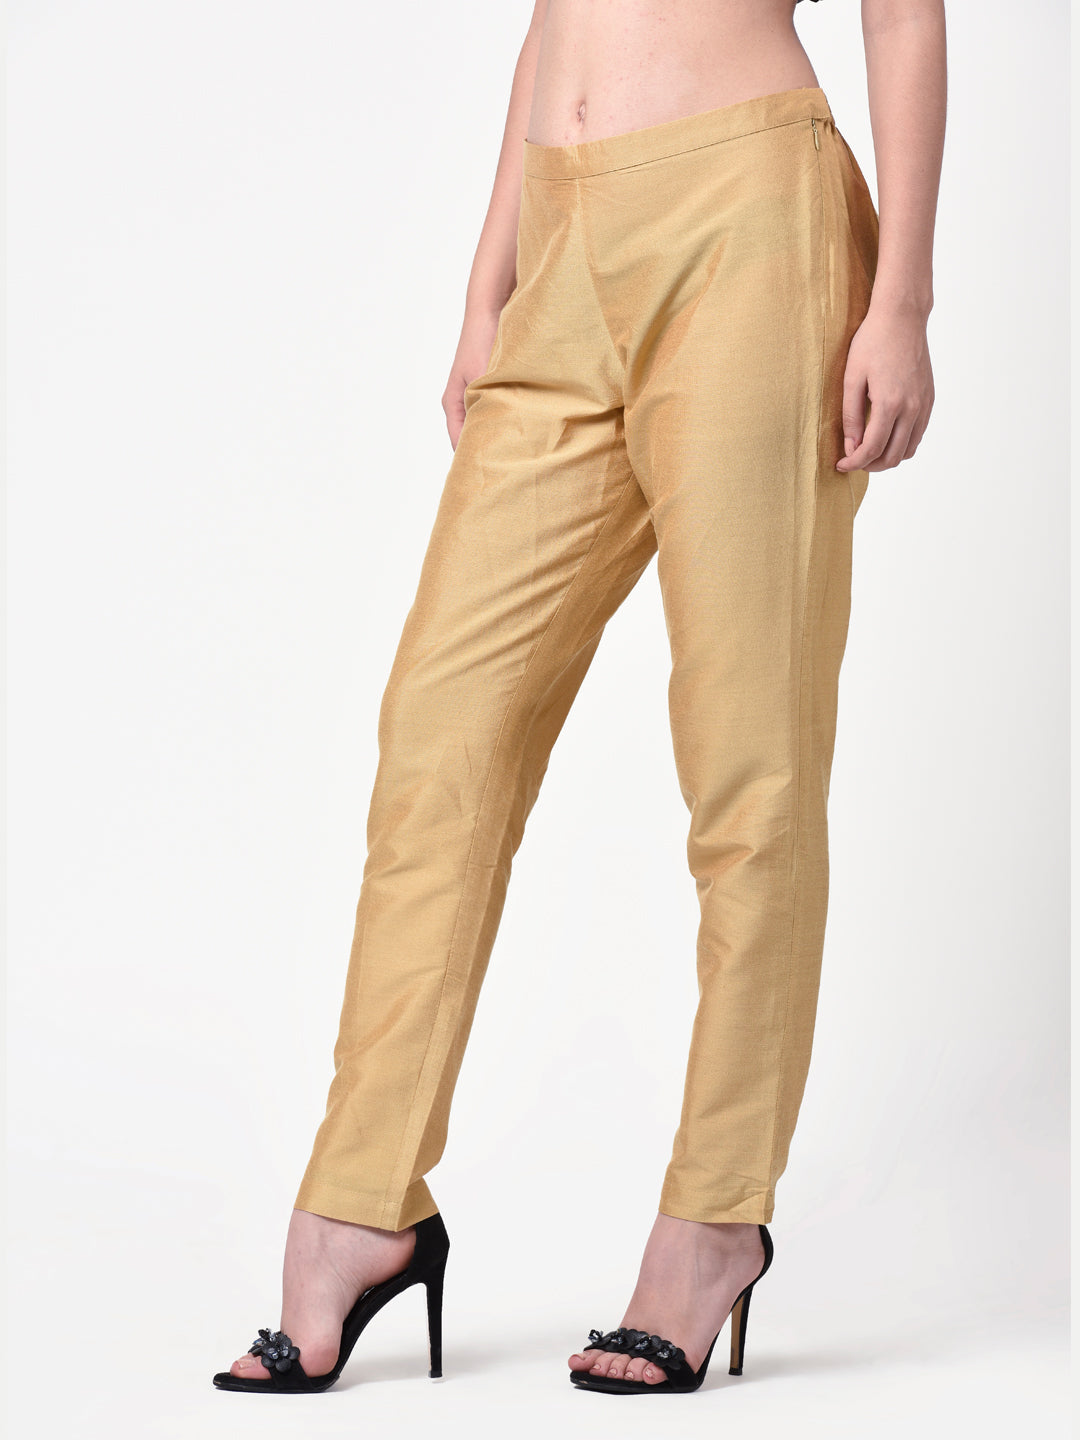 Indya Golden Poly Silk Fitted Pants Extra Small Size - Vvalyou